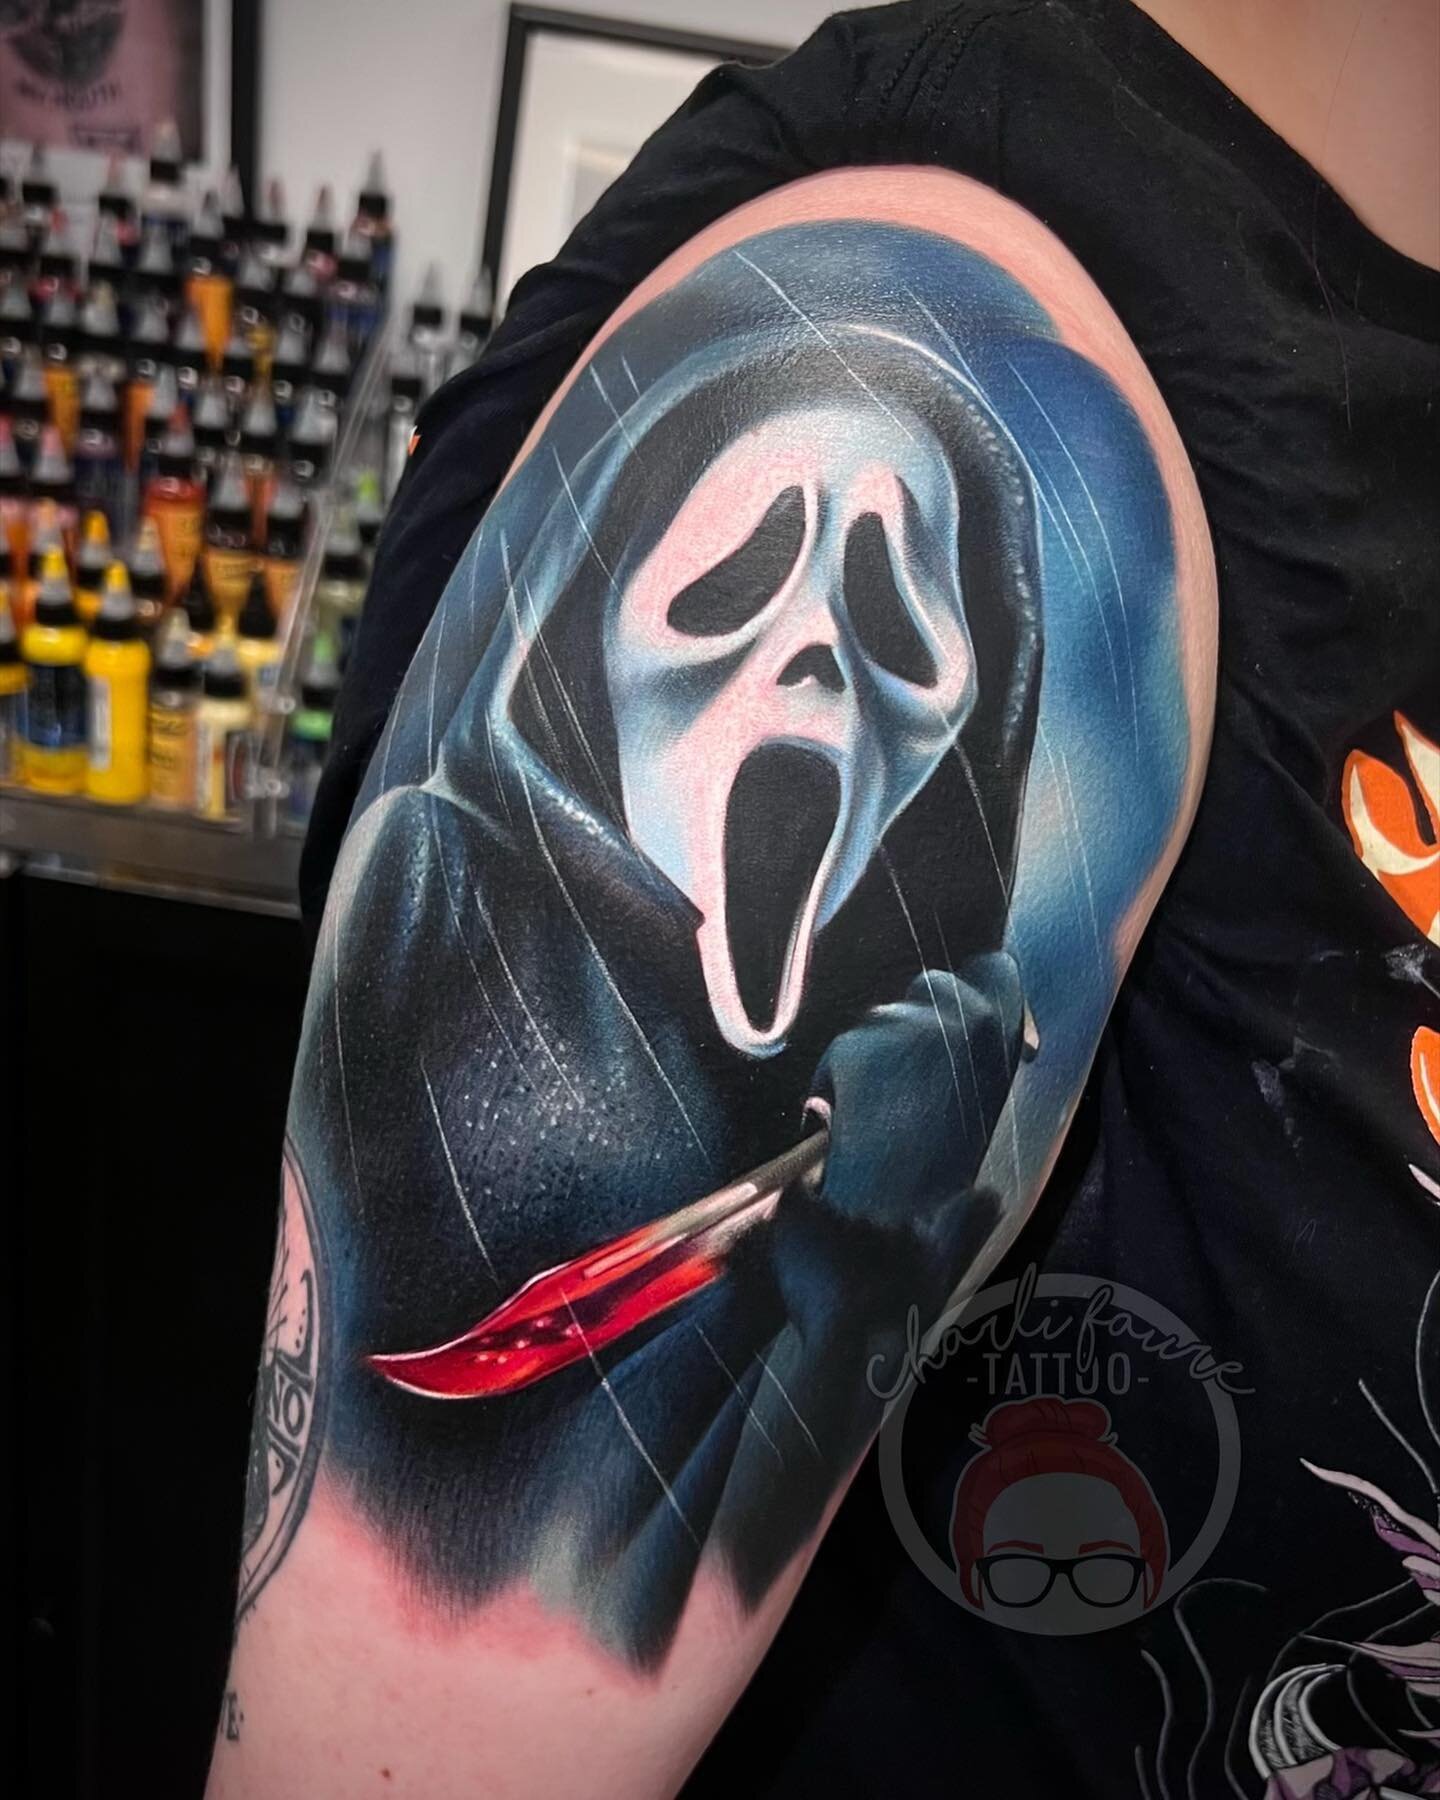 What&rsquo;s your favourite scary movie? 📞 
I&rsquo;m so excited I finally had an opportunity to tattoo Ghostface in a colour portrait! I love horror movies and always have time for horror tattoos, if you&rsquo;re keen on one please let me know 🥰🥰